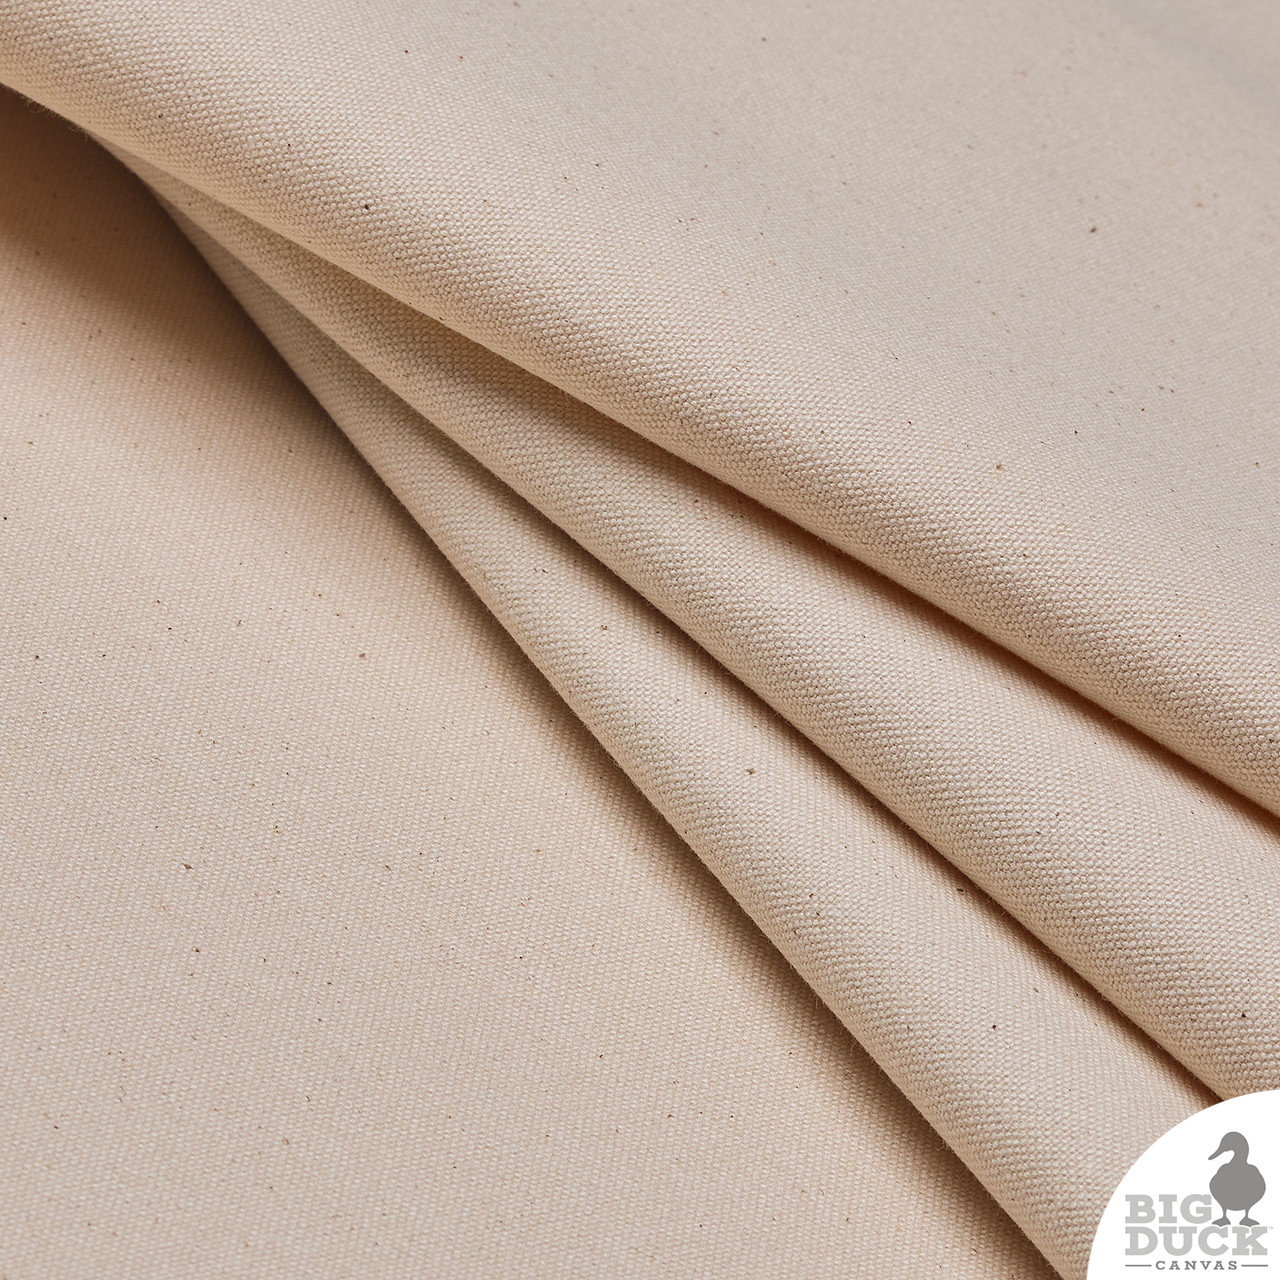 Premium 10oz Natural Cotton Duck Canvas Fabric - Versatile & Durable - 63  Width - Ideal for Crafts, Upholstery, and Home Projects - 20 Yards